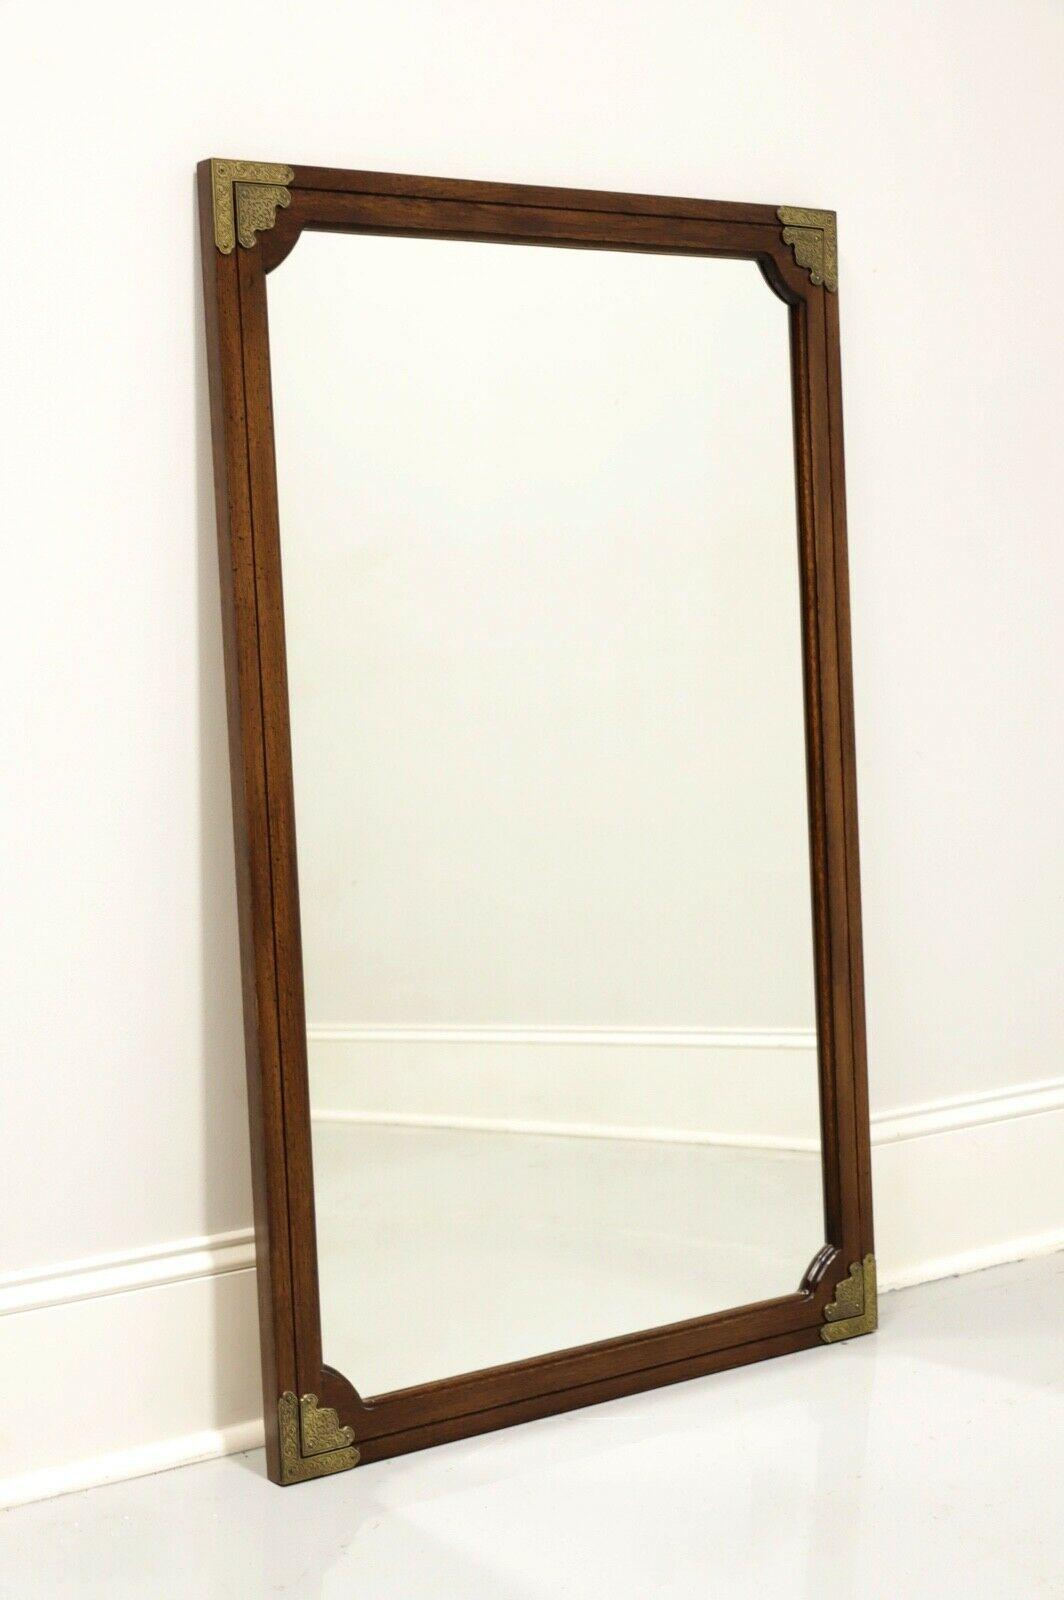 HUNTLEY THOMASVILLE Japanese Tansu Campaign Style Wall Mirror 1